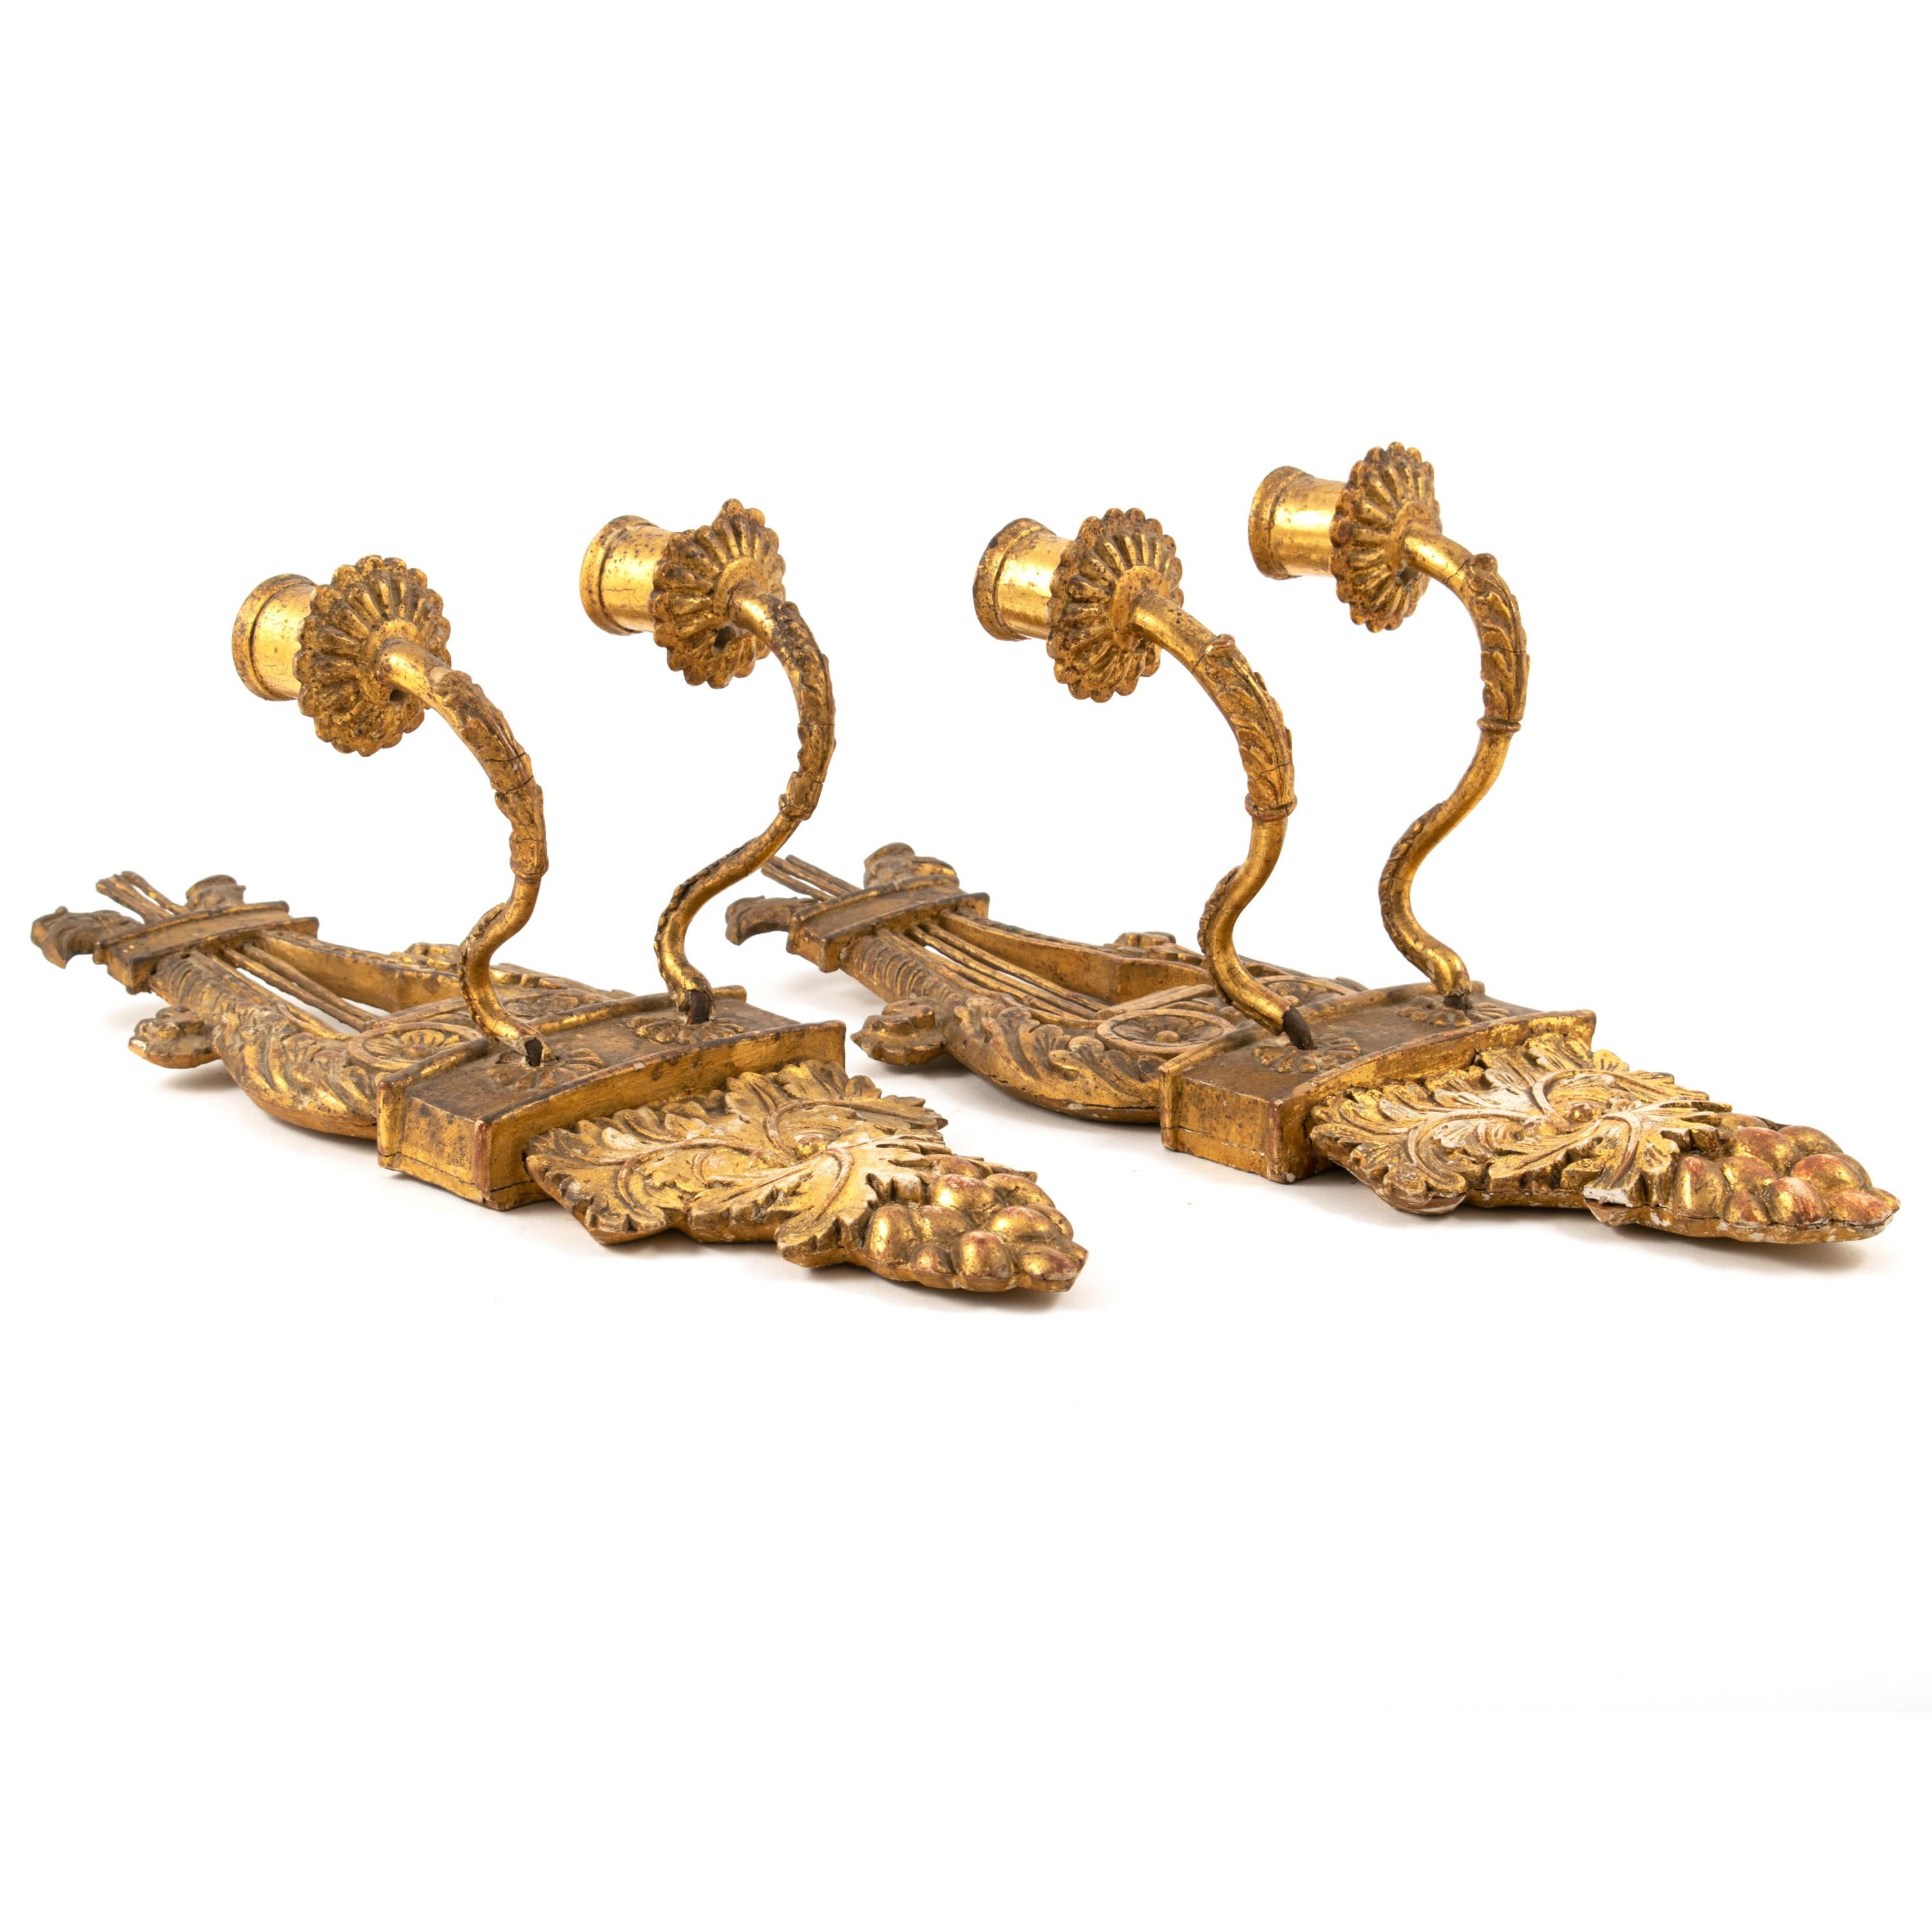 Pair of Swedish Gustavian double-arm sconces.
Carved giltwood. Lyre-shaped top with griffin heads. At the bottom vine leaves and grape clusters.
In original and untouched condition, with charming age-related patina.
Sweden, 1780-1800.